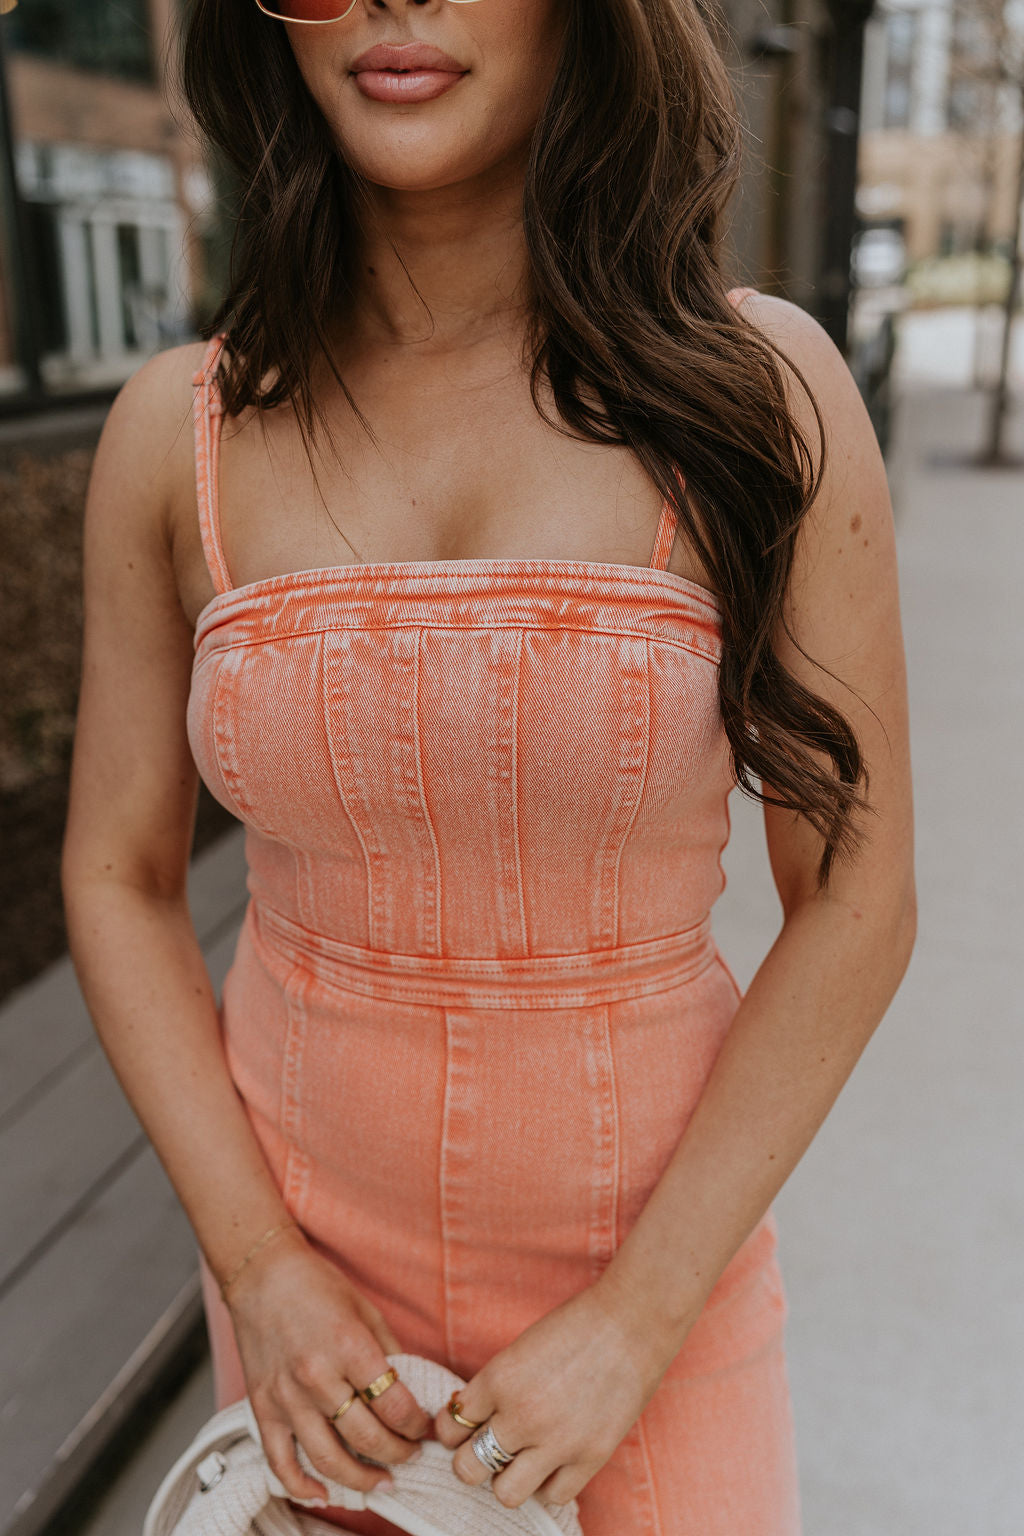 Upper body front view of brunette model wearing the Regan Wide Leg Denim Jumpsuit in Coral, that has coral denim fabric, wide legs, and thin straps. Model is holding beige purse in front of her.